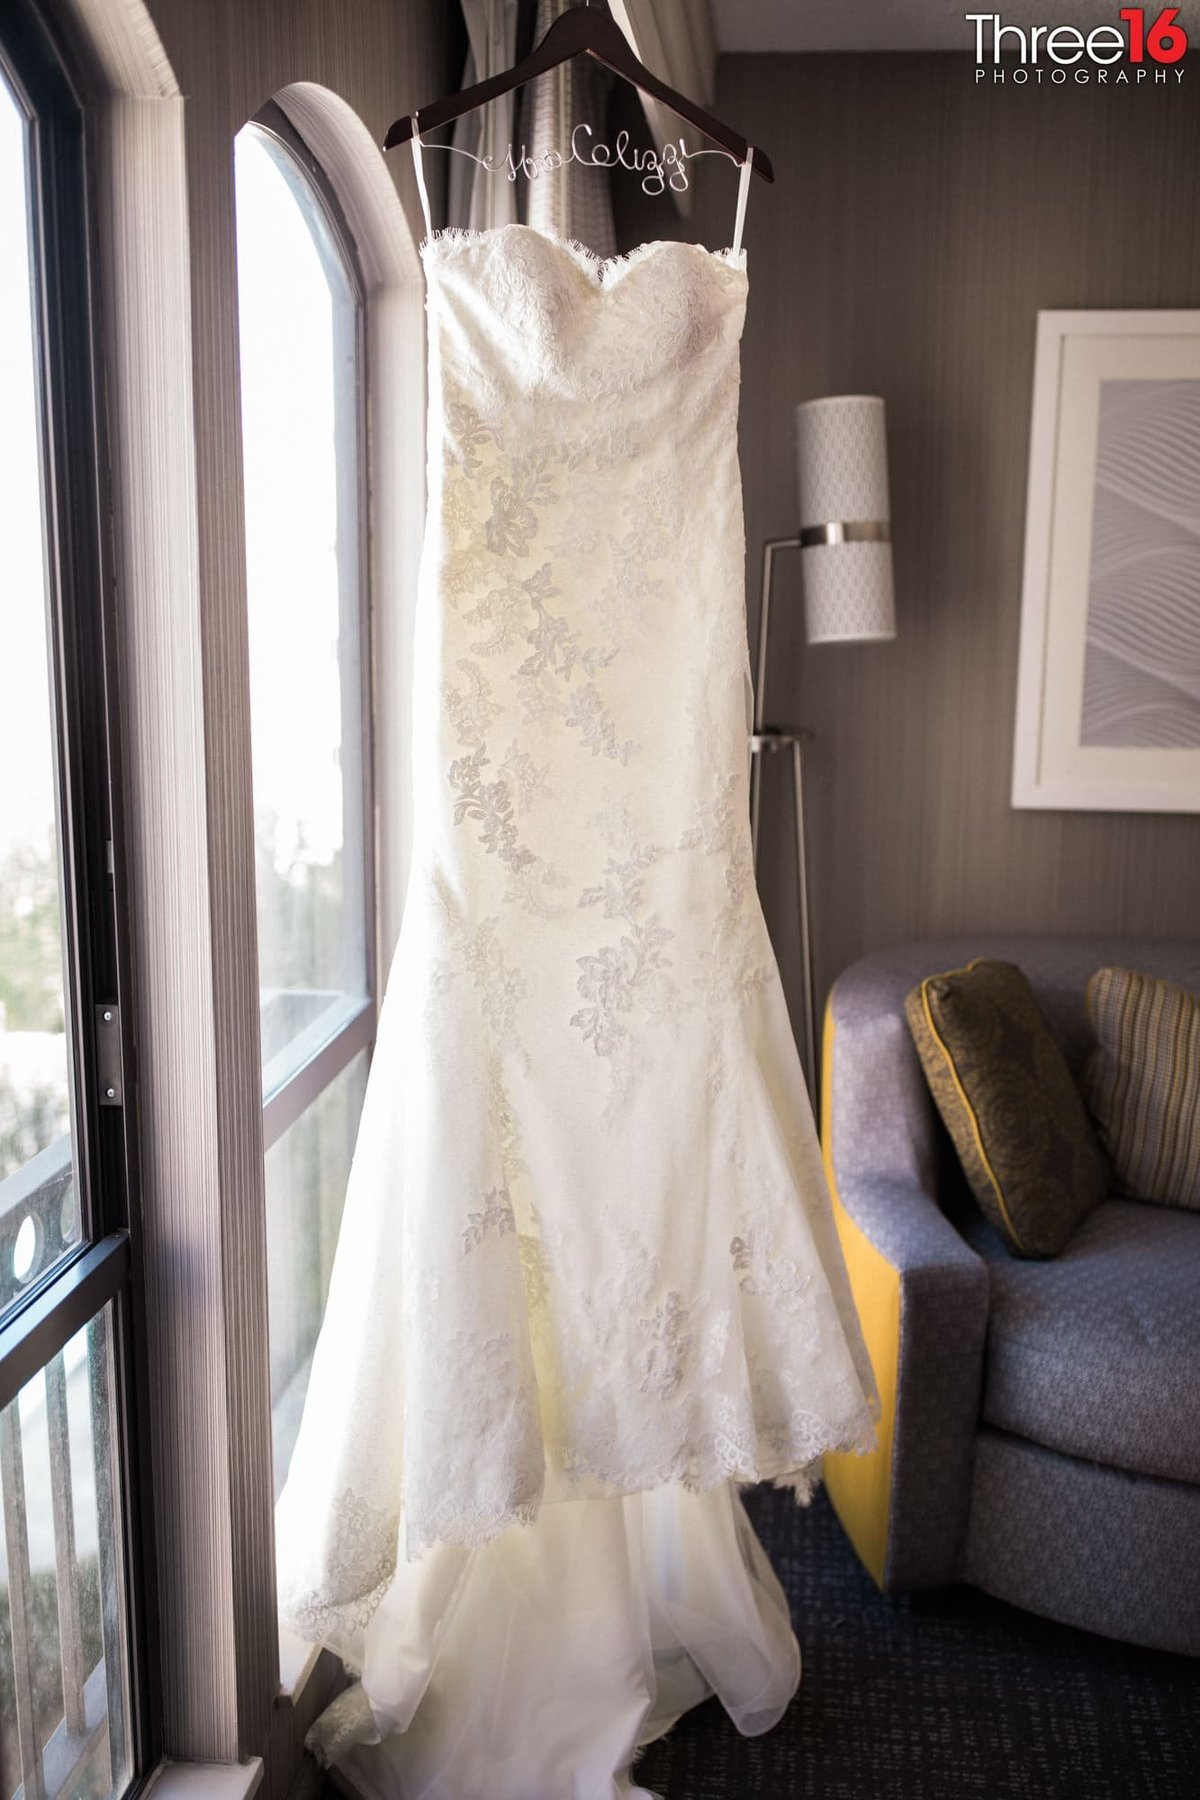 The Brides wedding gown hanging in front a window